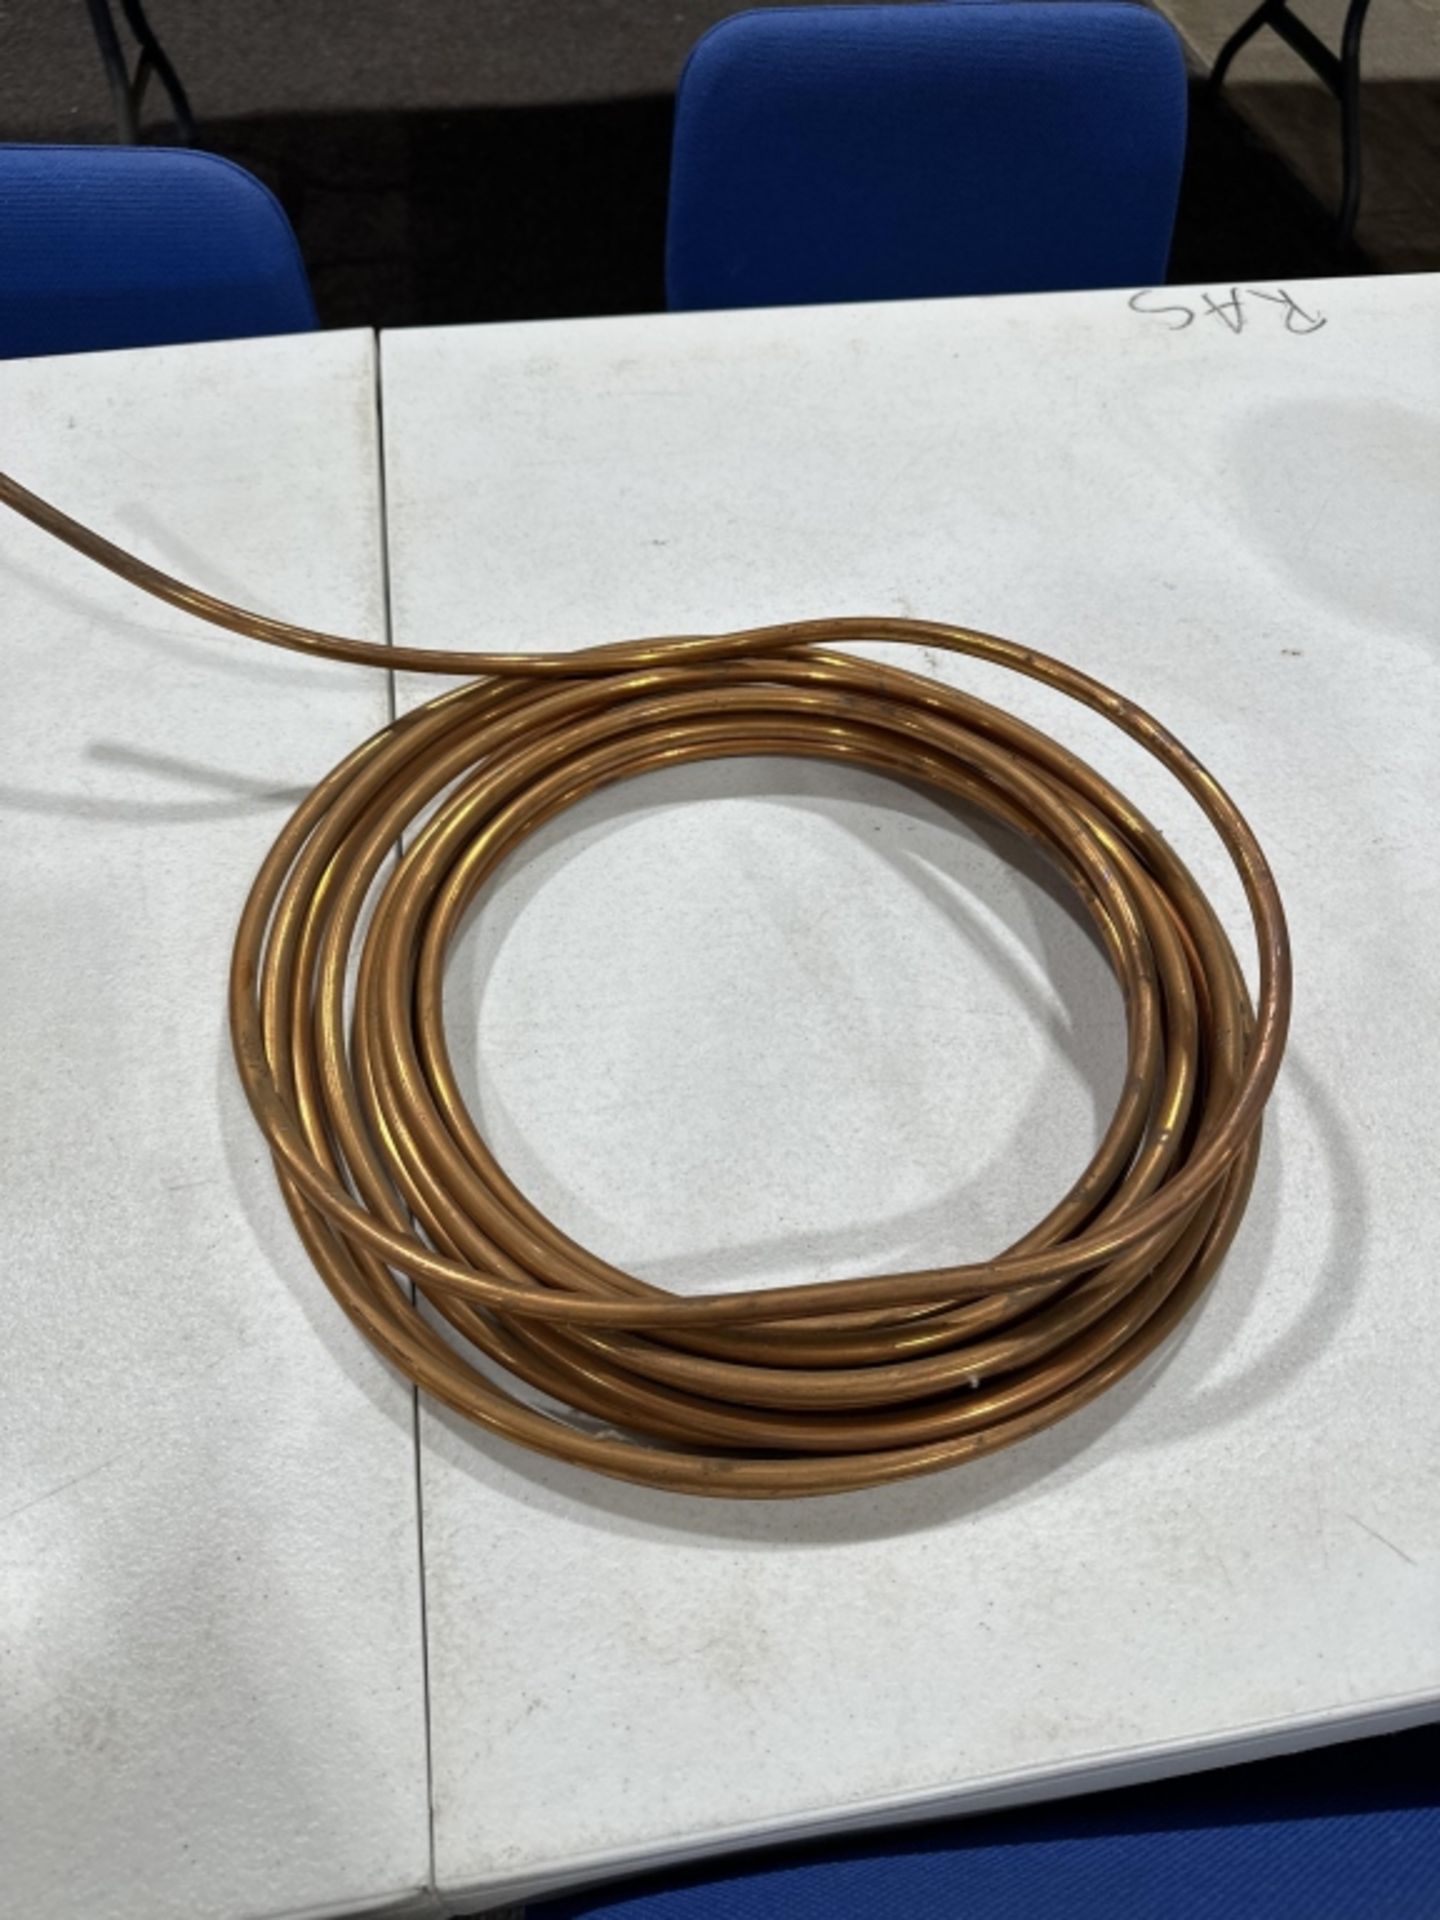 3/8" Copper Tubing - Image 4 of 4